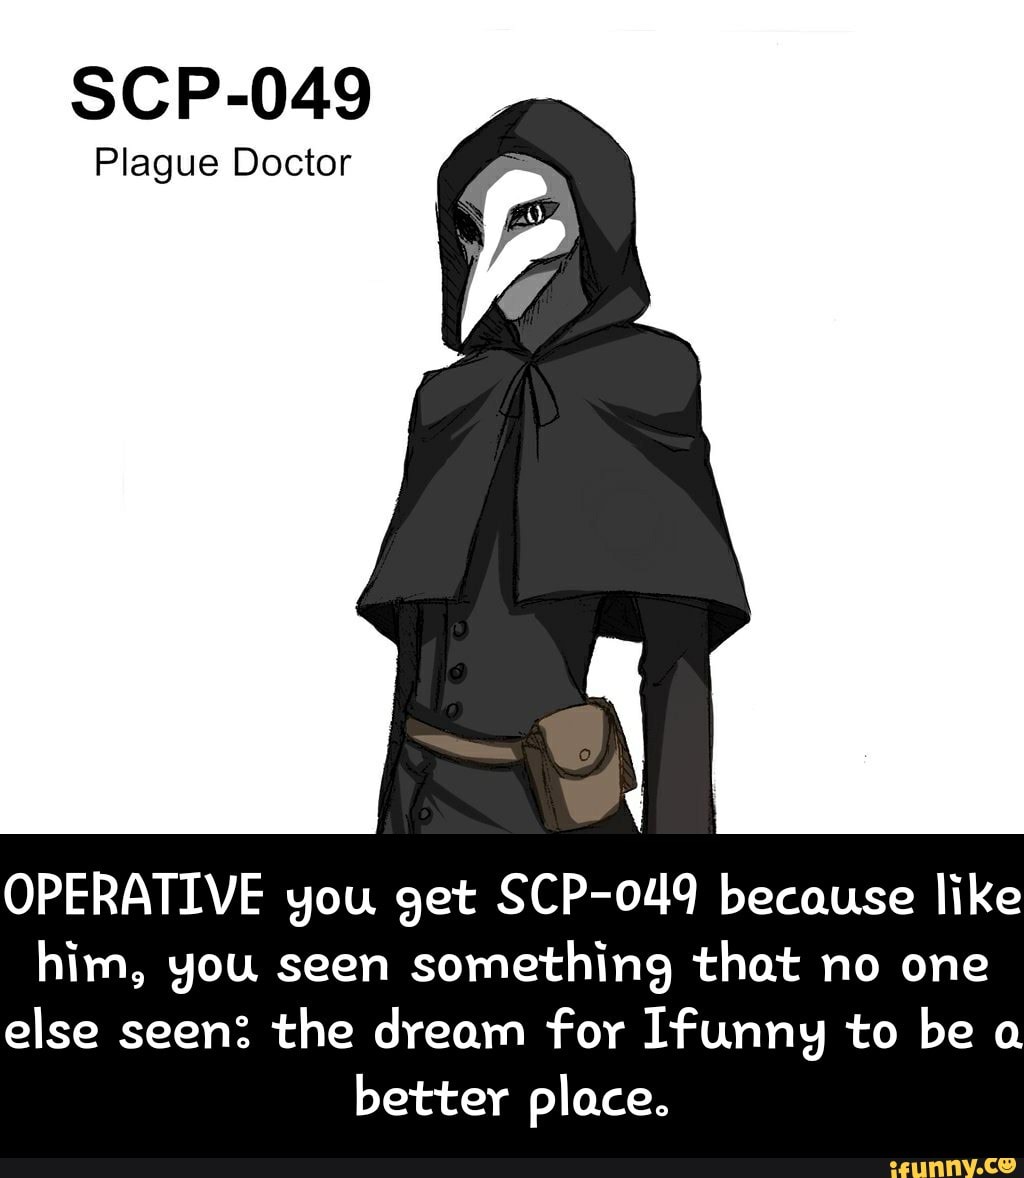 Scp 049 Plague Doctor Operative You Get Scp Oi Lq Because Like Him9 You Seen Something That No One Else Seen The Dream For Ifunng To Be A Better Placeº Operative You Get Scp 049